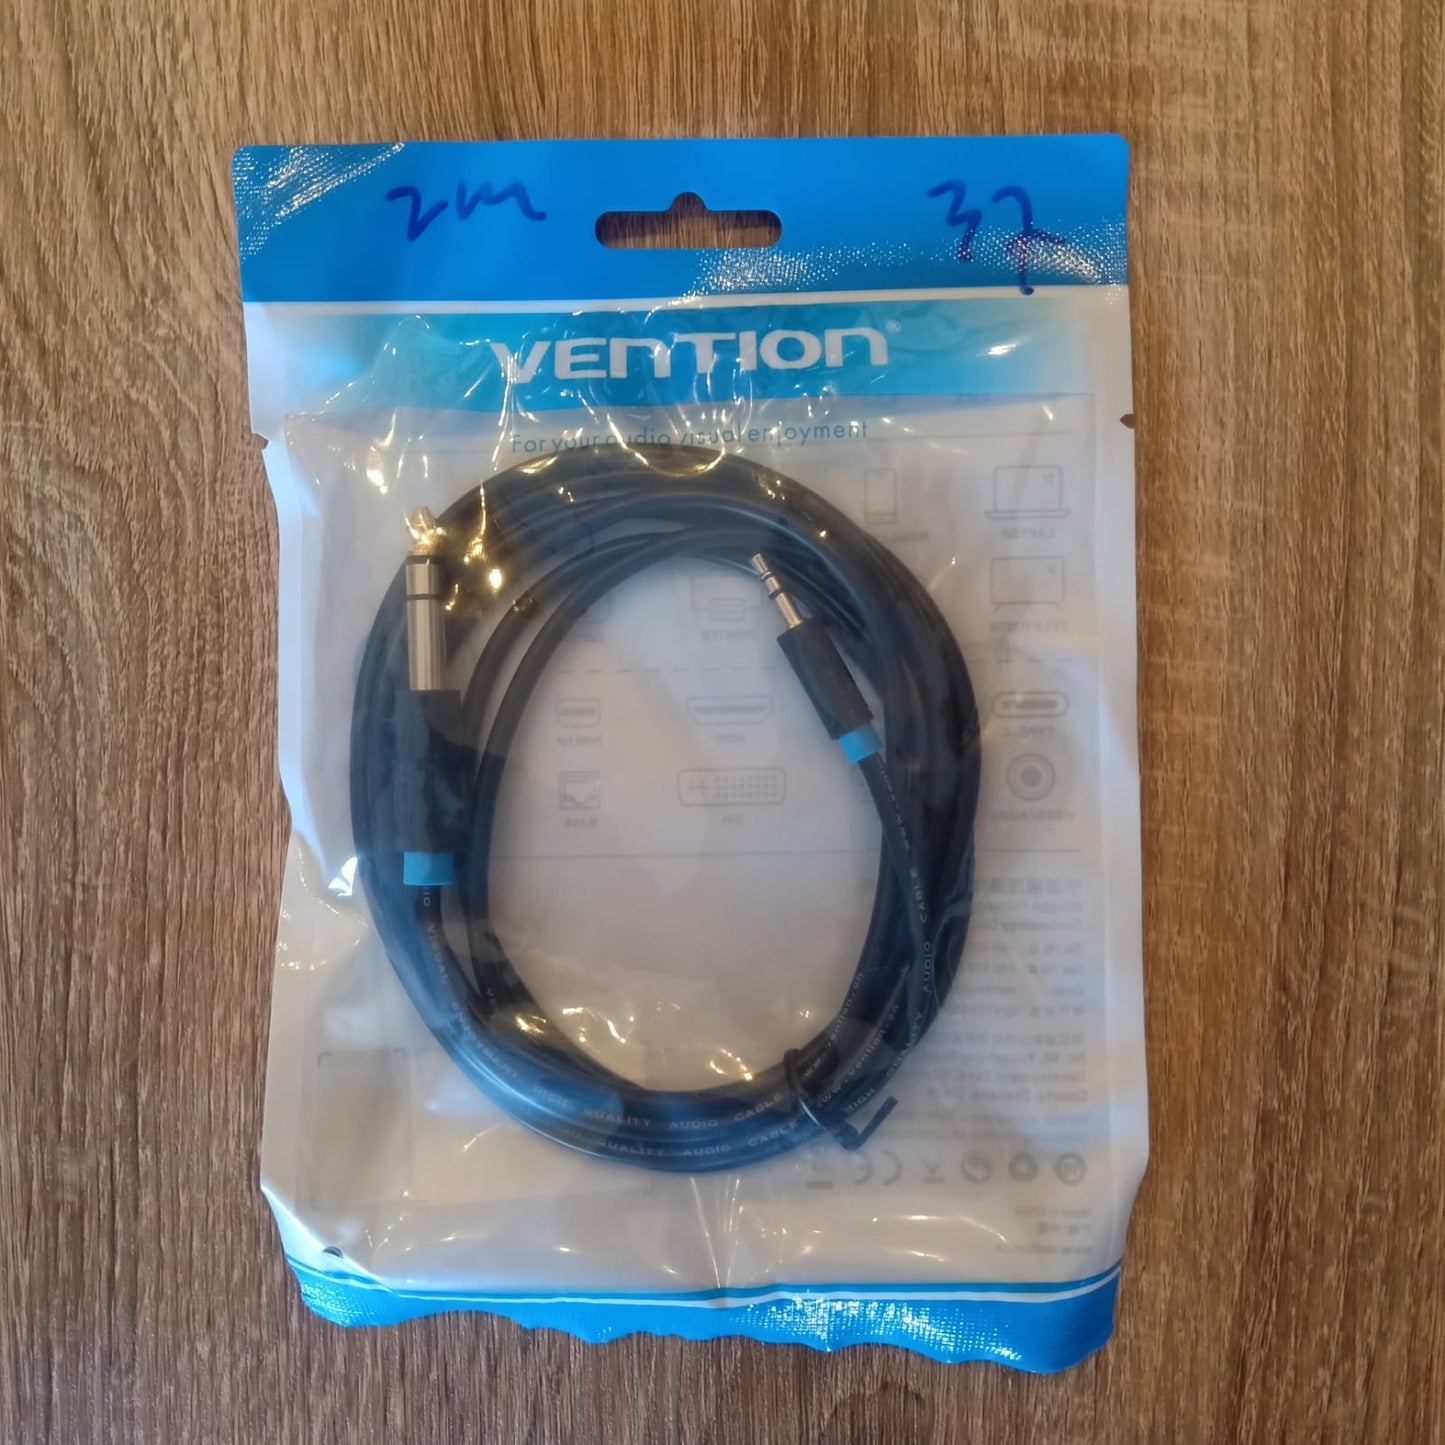 Vention jack Aux 6.5mm Male to 3.5mm